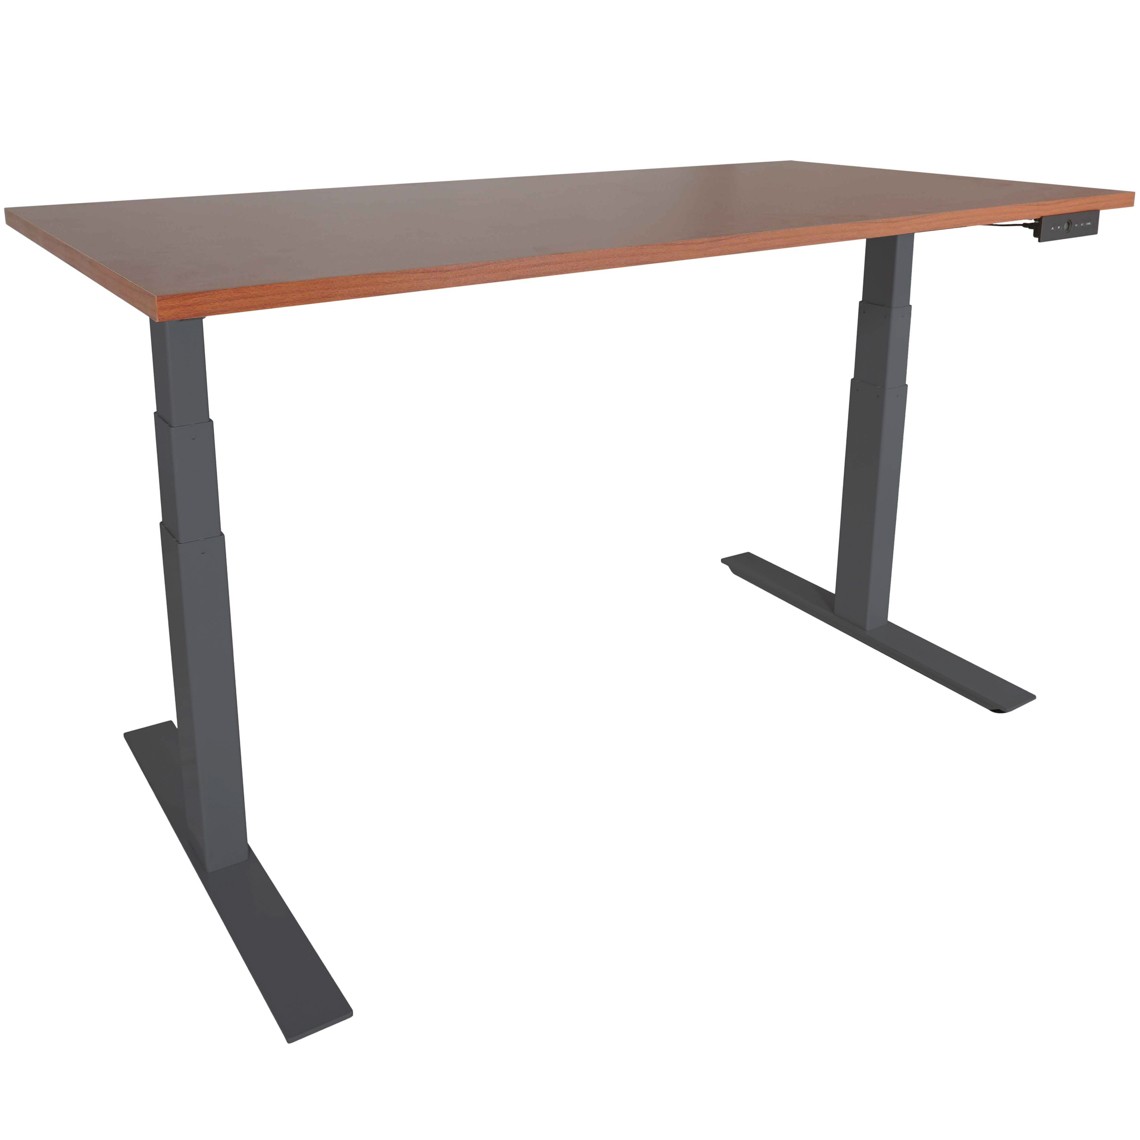 A6 Adjustable Sit To Stand Desk 24"- 50" w/ Wood 30" x 48" Top - view 1